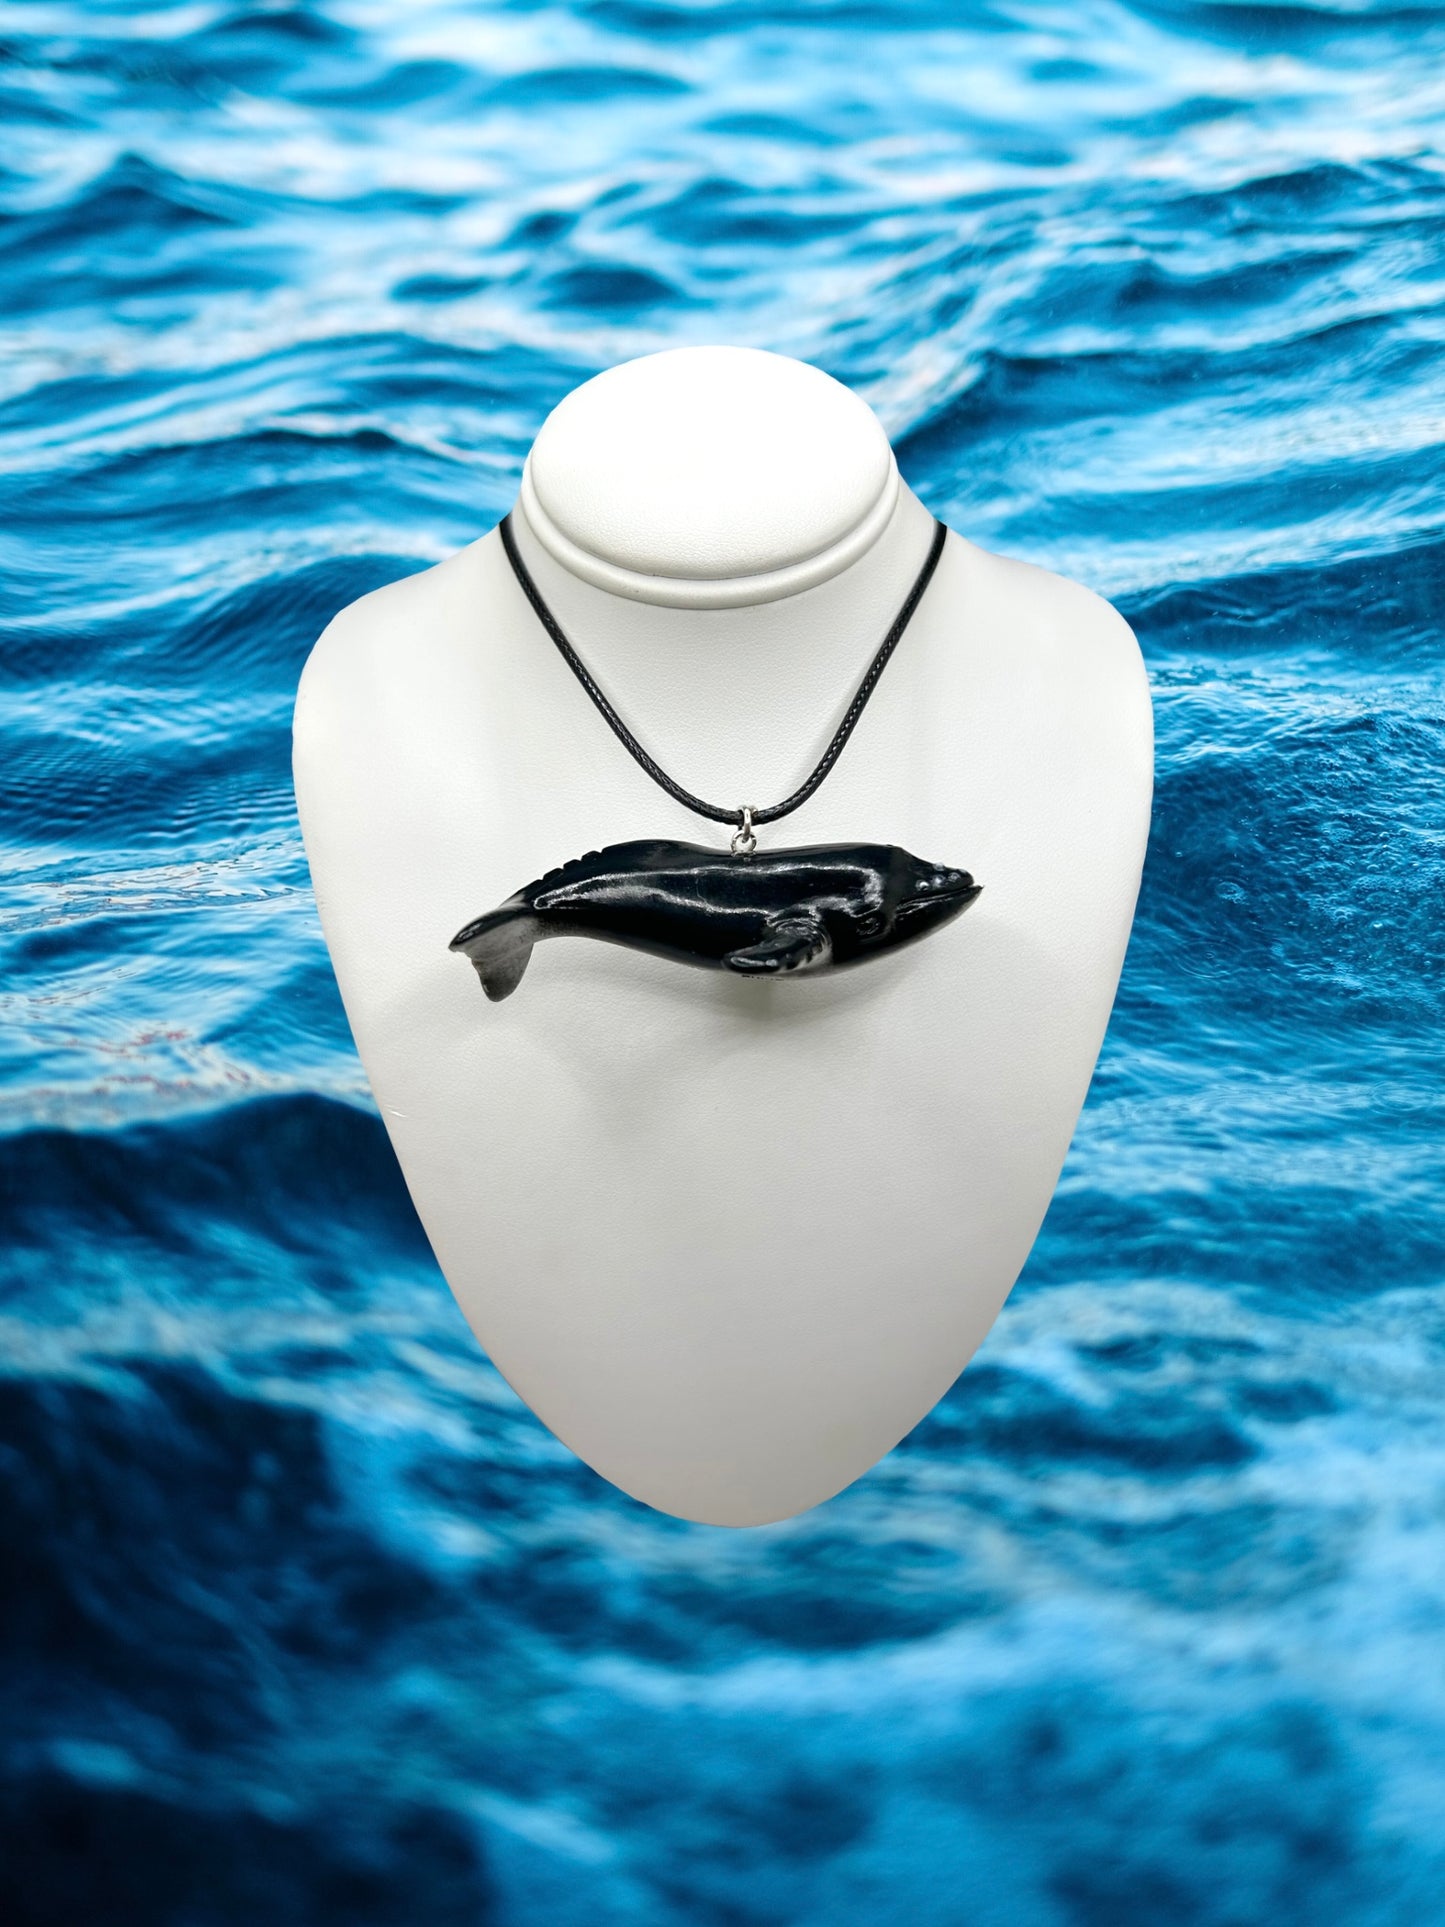 Humpback Whale Necklace